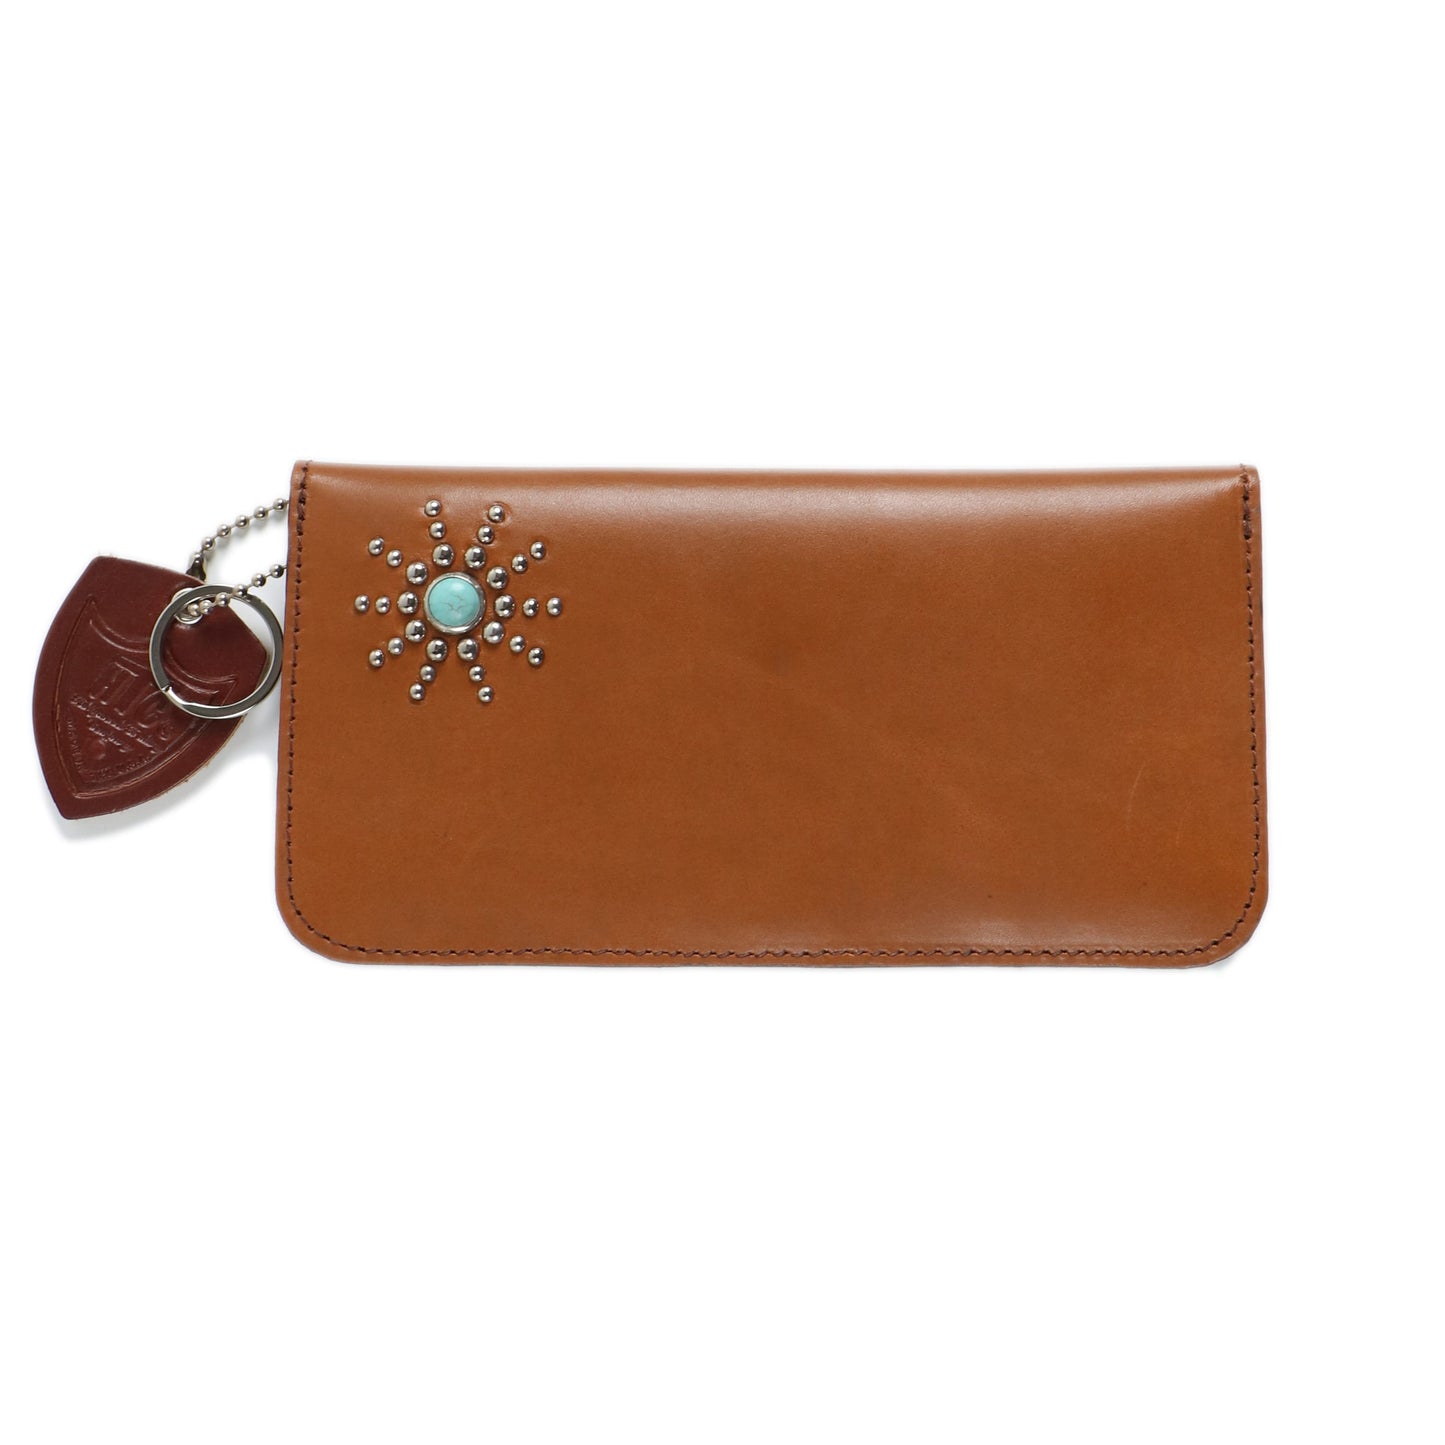 T-1 Wallet #SB2 13 Turquoise